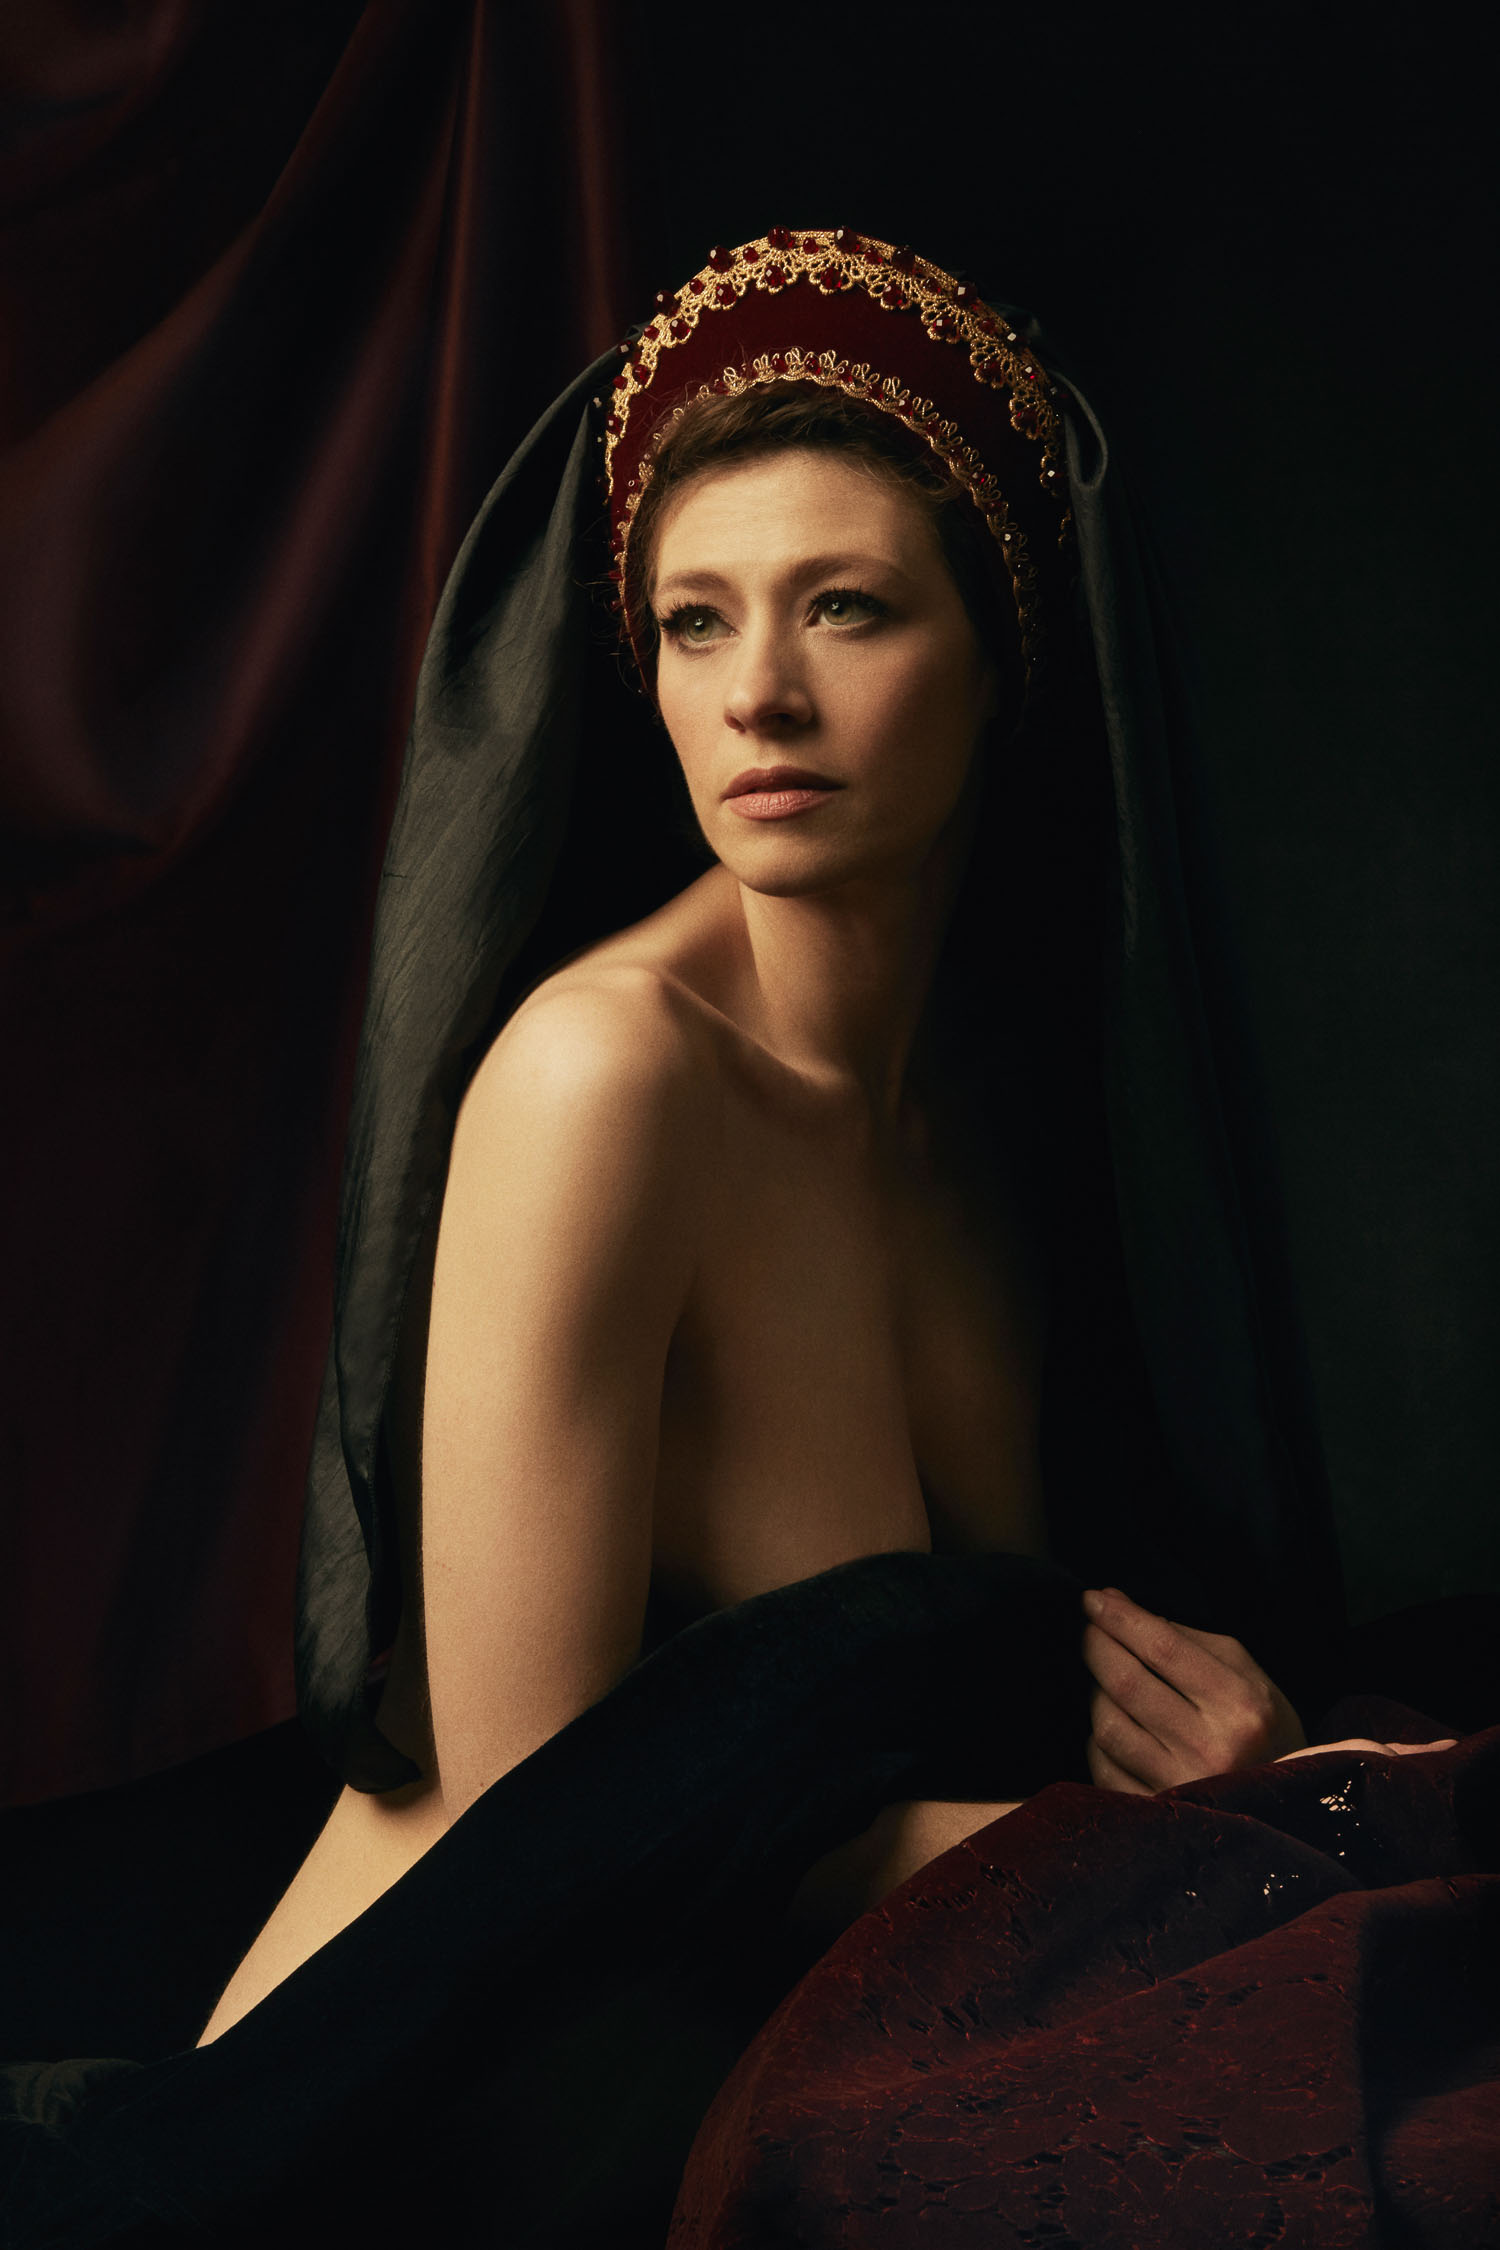 Renaissance inspired boudoir photography by Thuy Vo